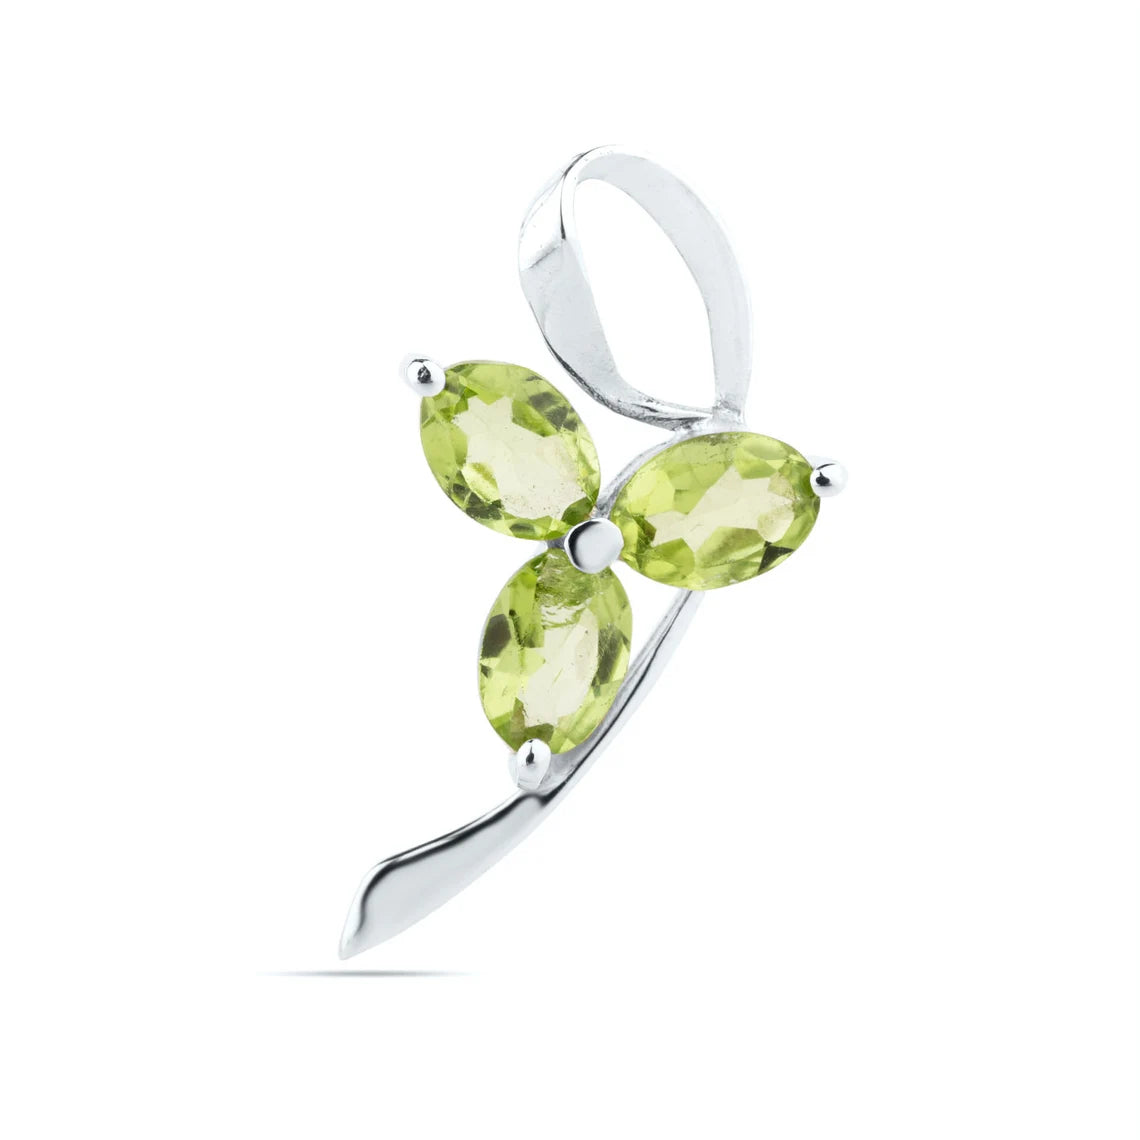 925 Solid Sterling Silver - 5X7 MM Oval Cut -100% Natural Peridot Gemstone Pendant - Handmade Silver Pendant